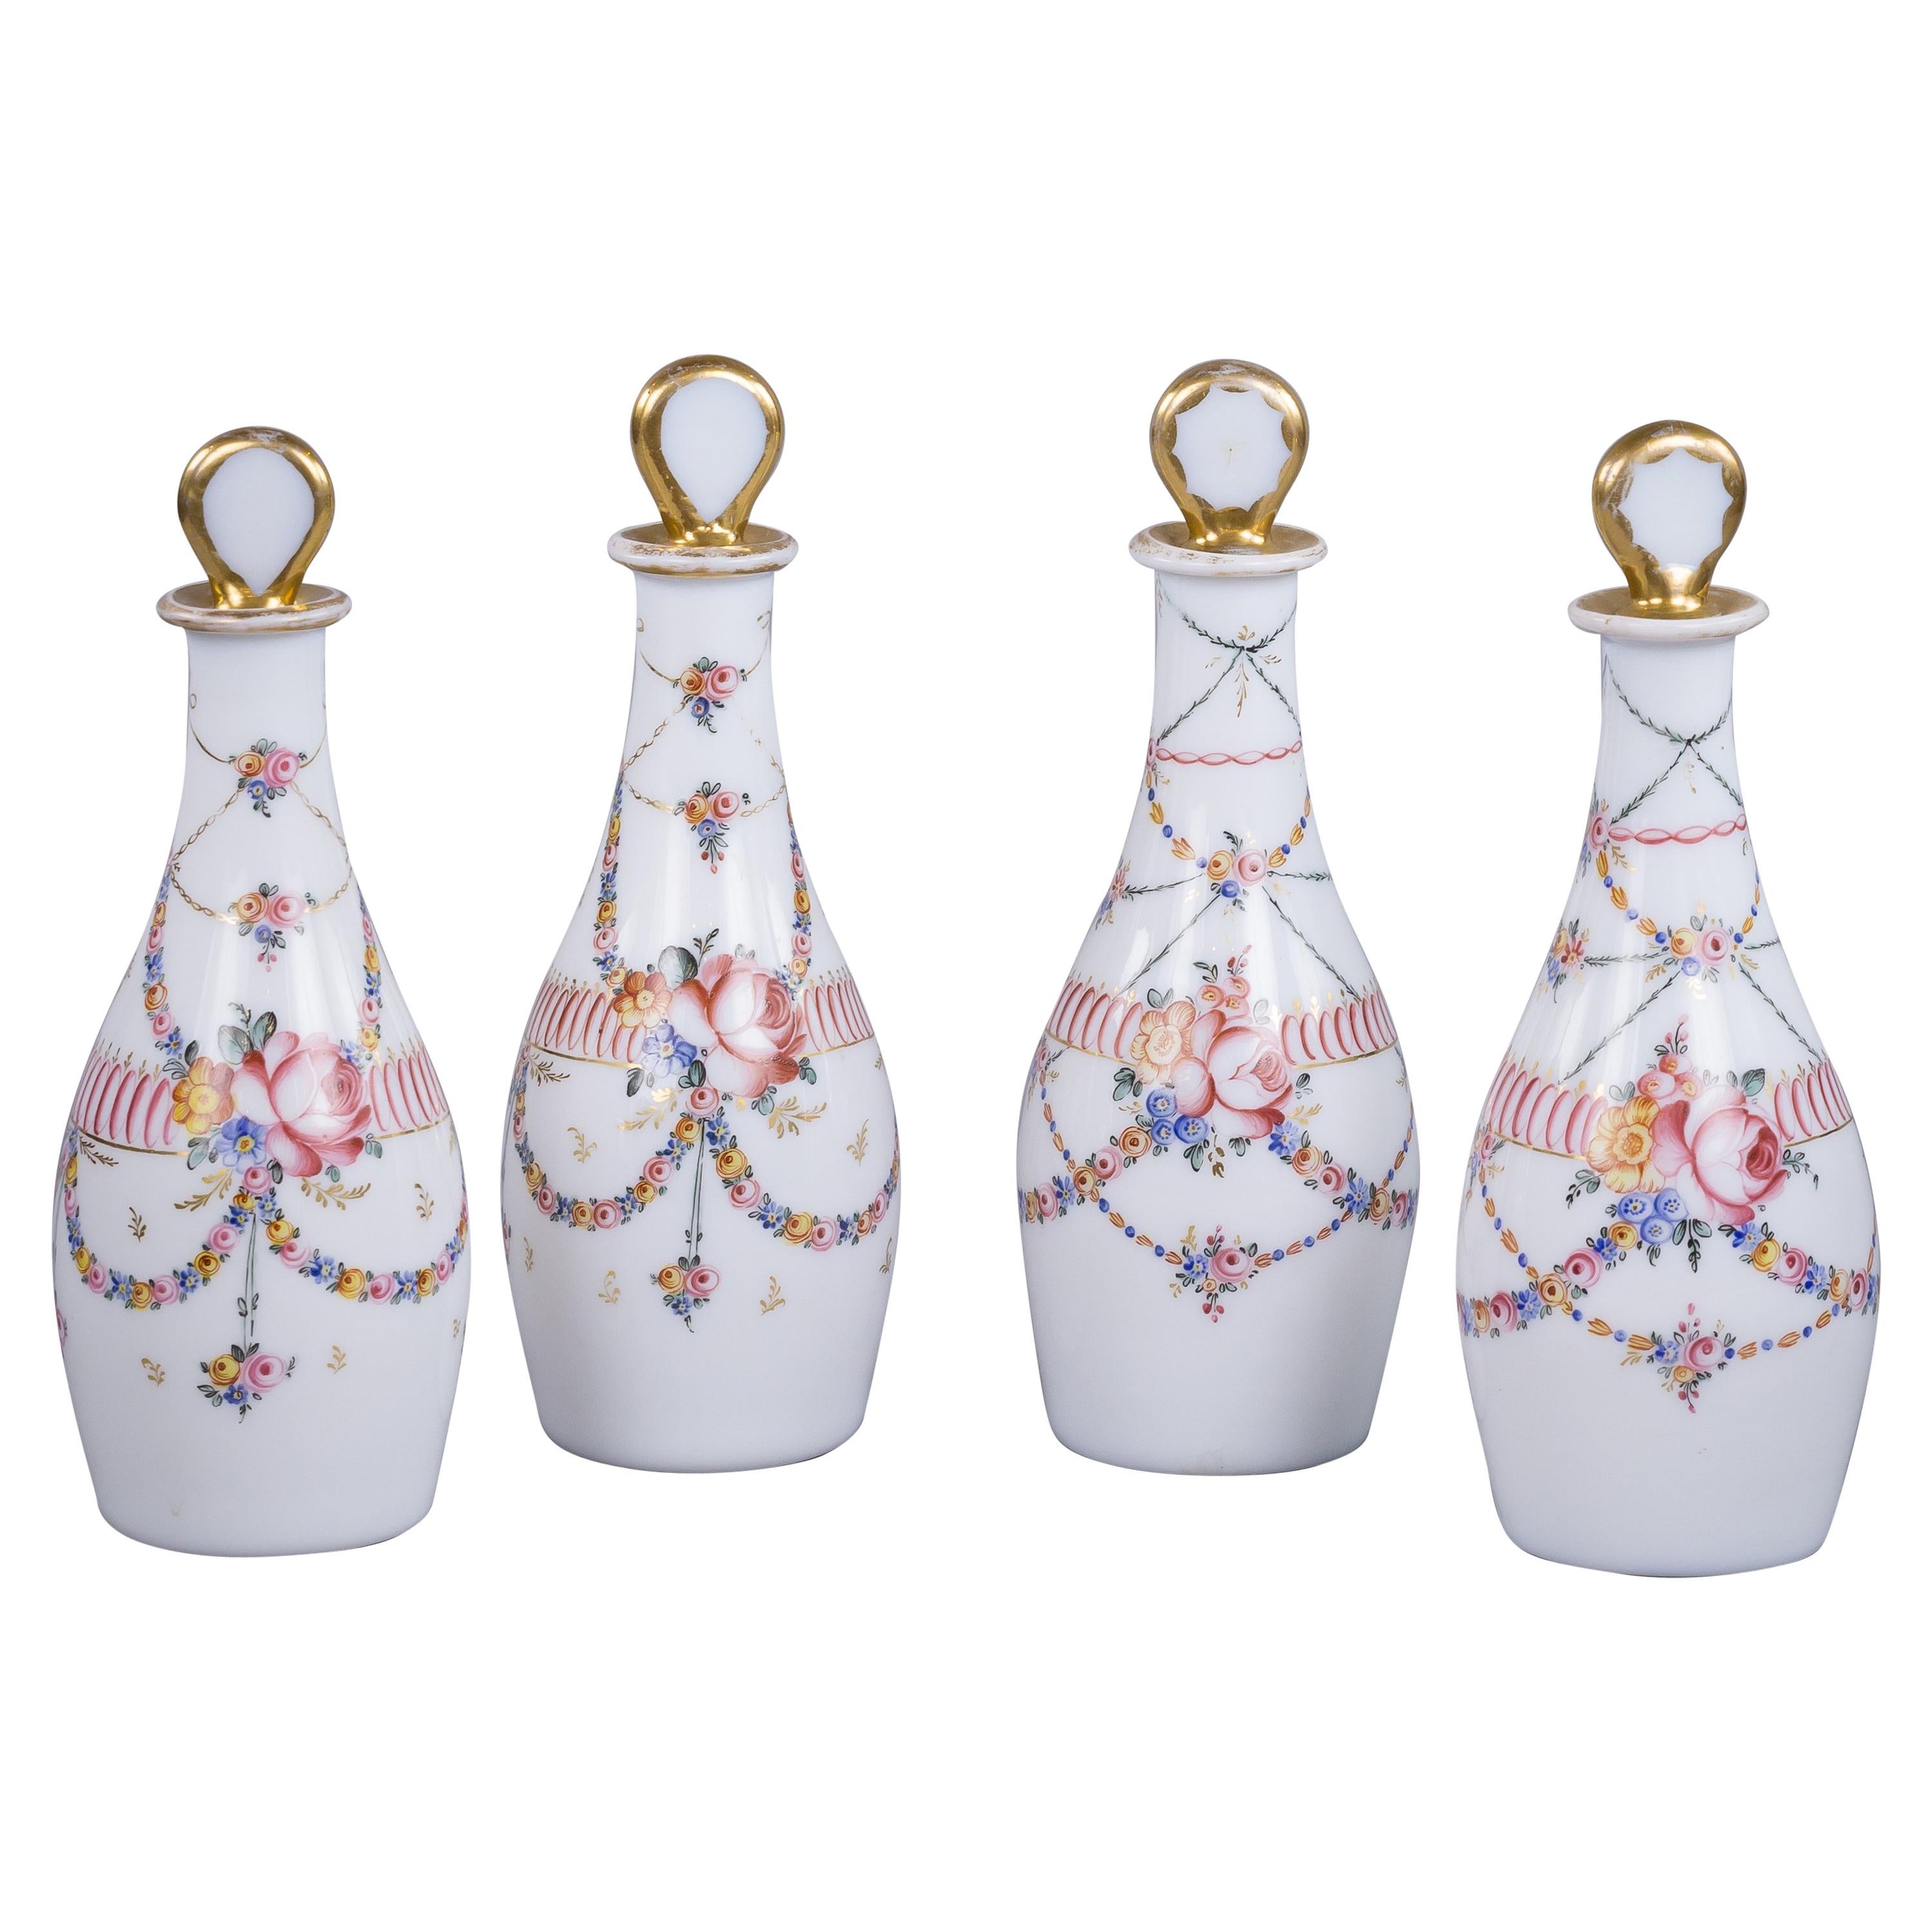 Set of Four French White Opaque Decanters and Stoppers, circa 1830